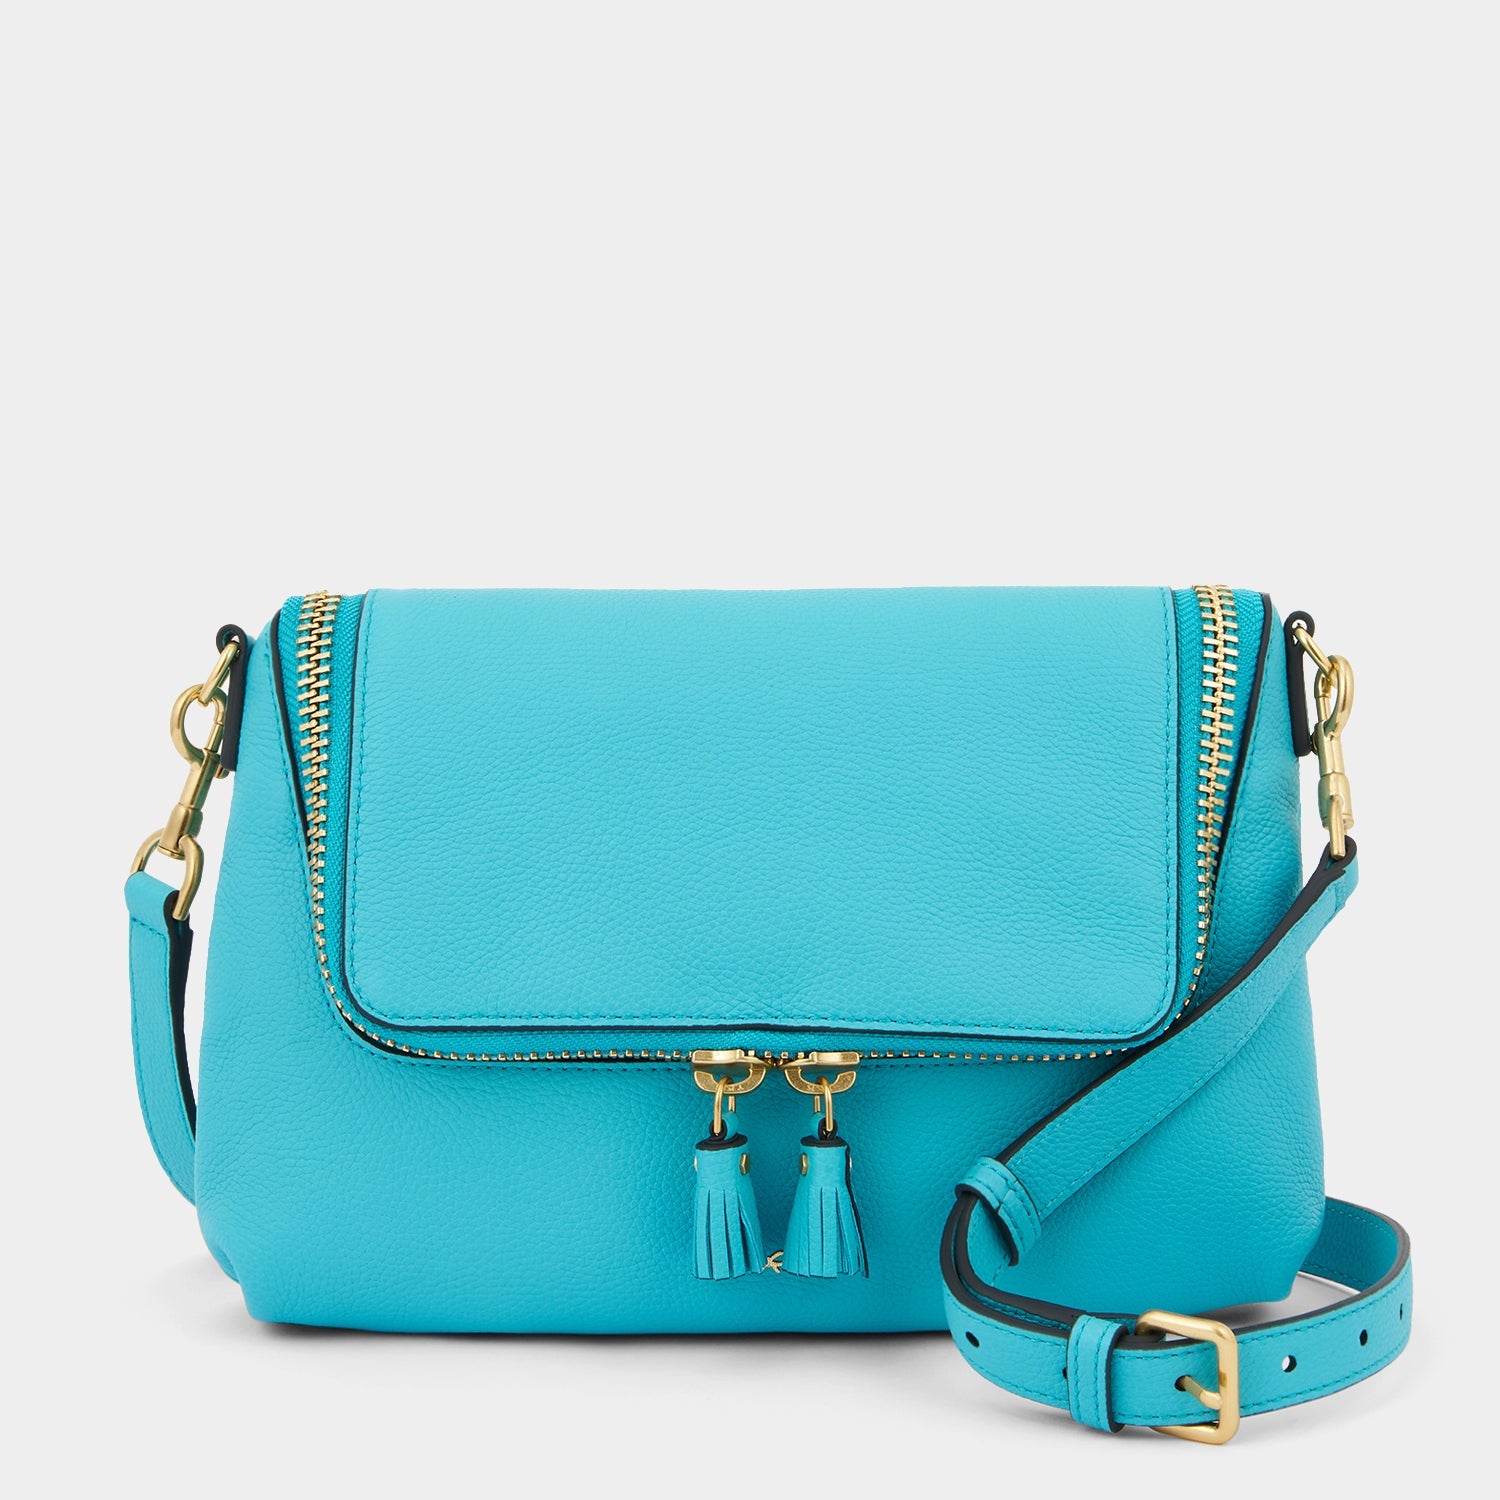 Maxi Zip Cross-body -

                  
                    Soft Leather in Turquoise -
                  

                  Anya Hindmarch EU
